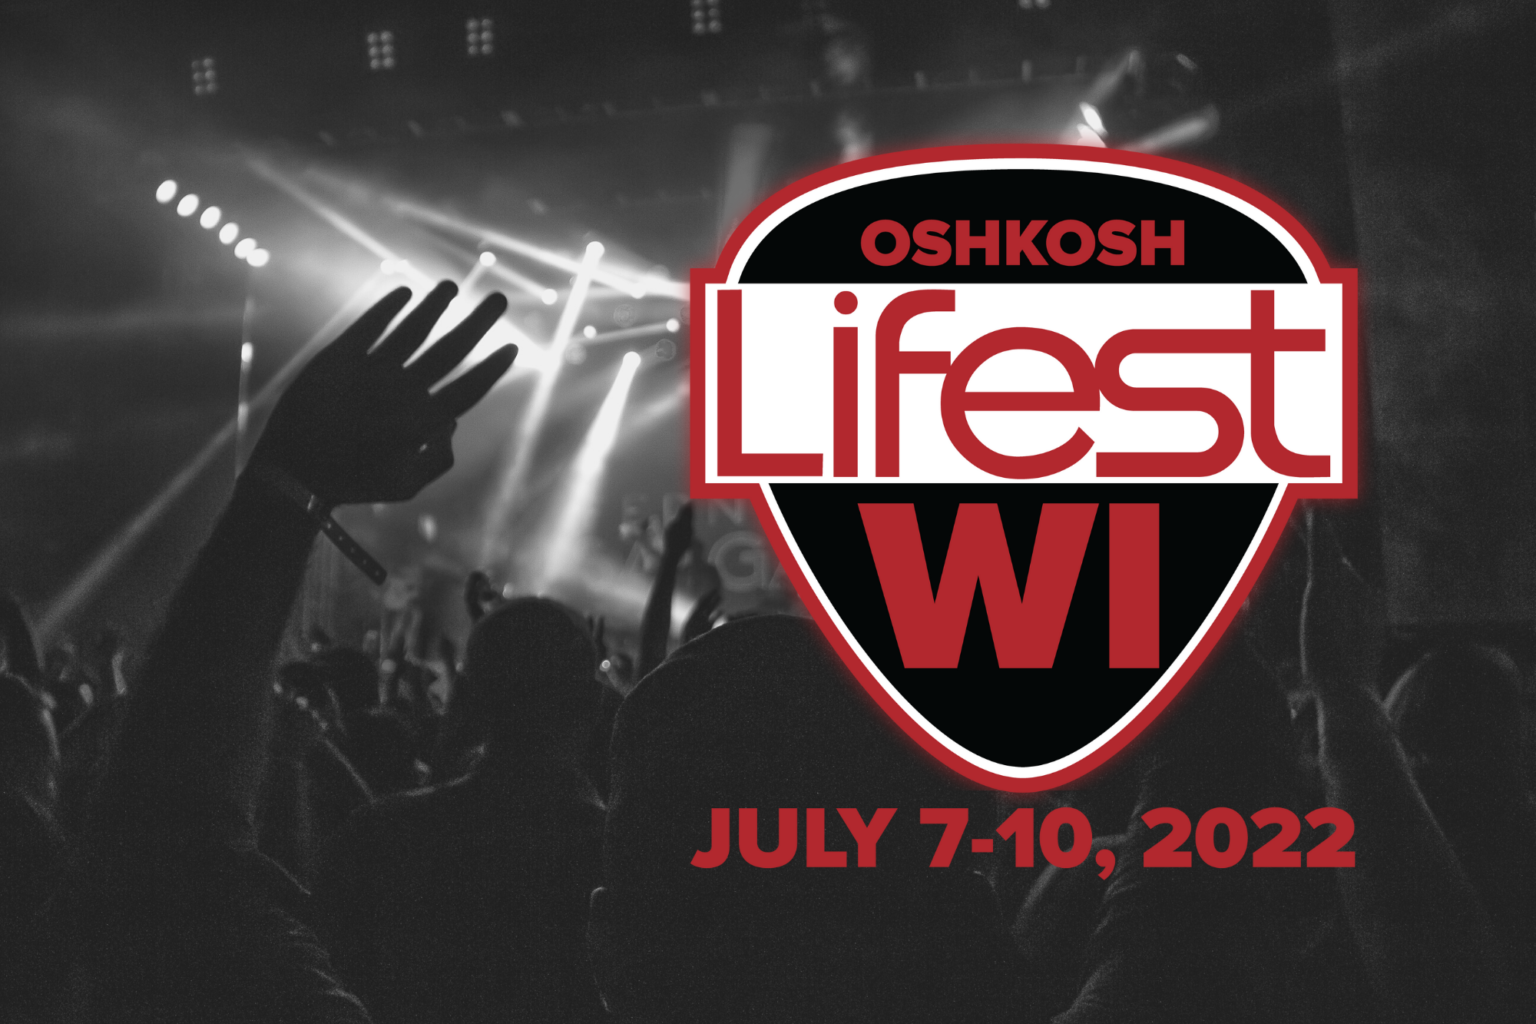 Lifest Wisconsin Right to Life